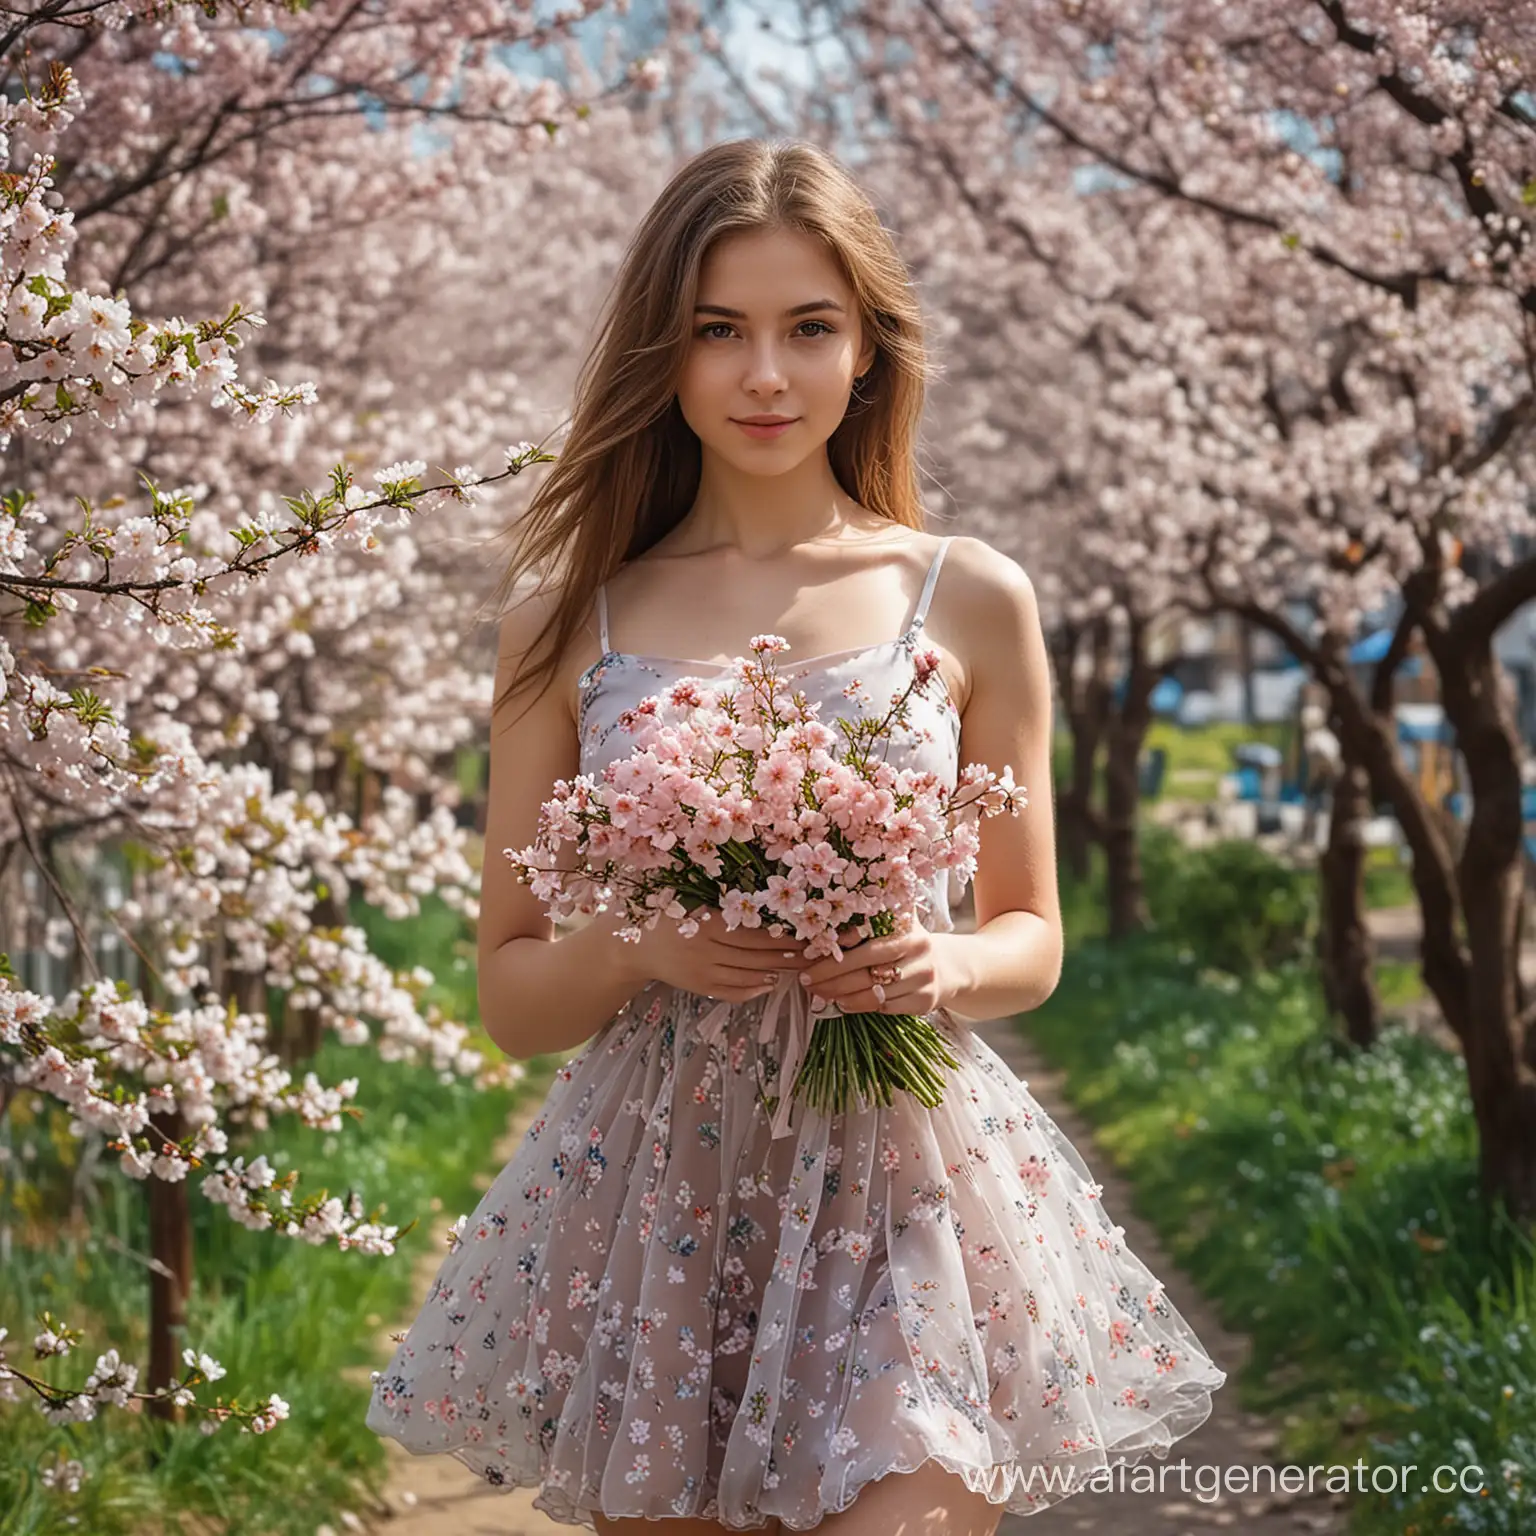 Russian-Village-Girl-in-Sexy-SemiTransparent-Dress-with-Cherry-Blossom-Bouquet